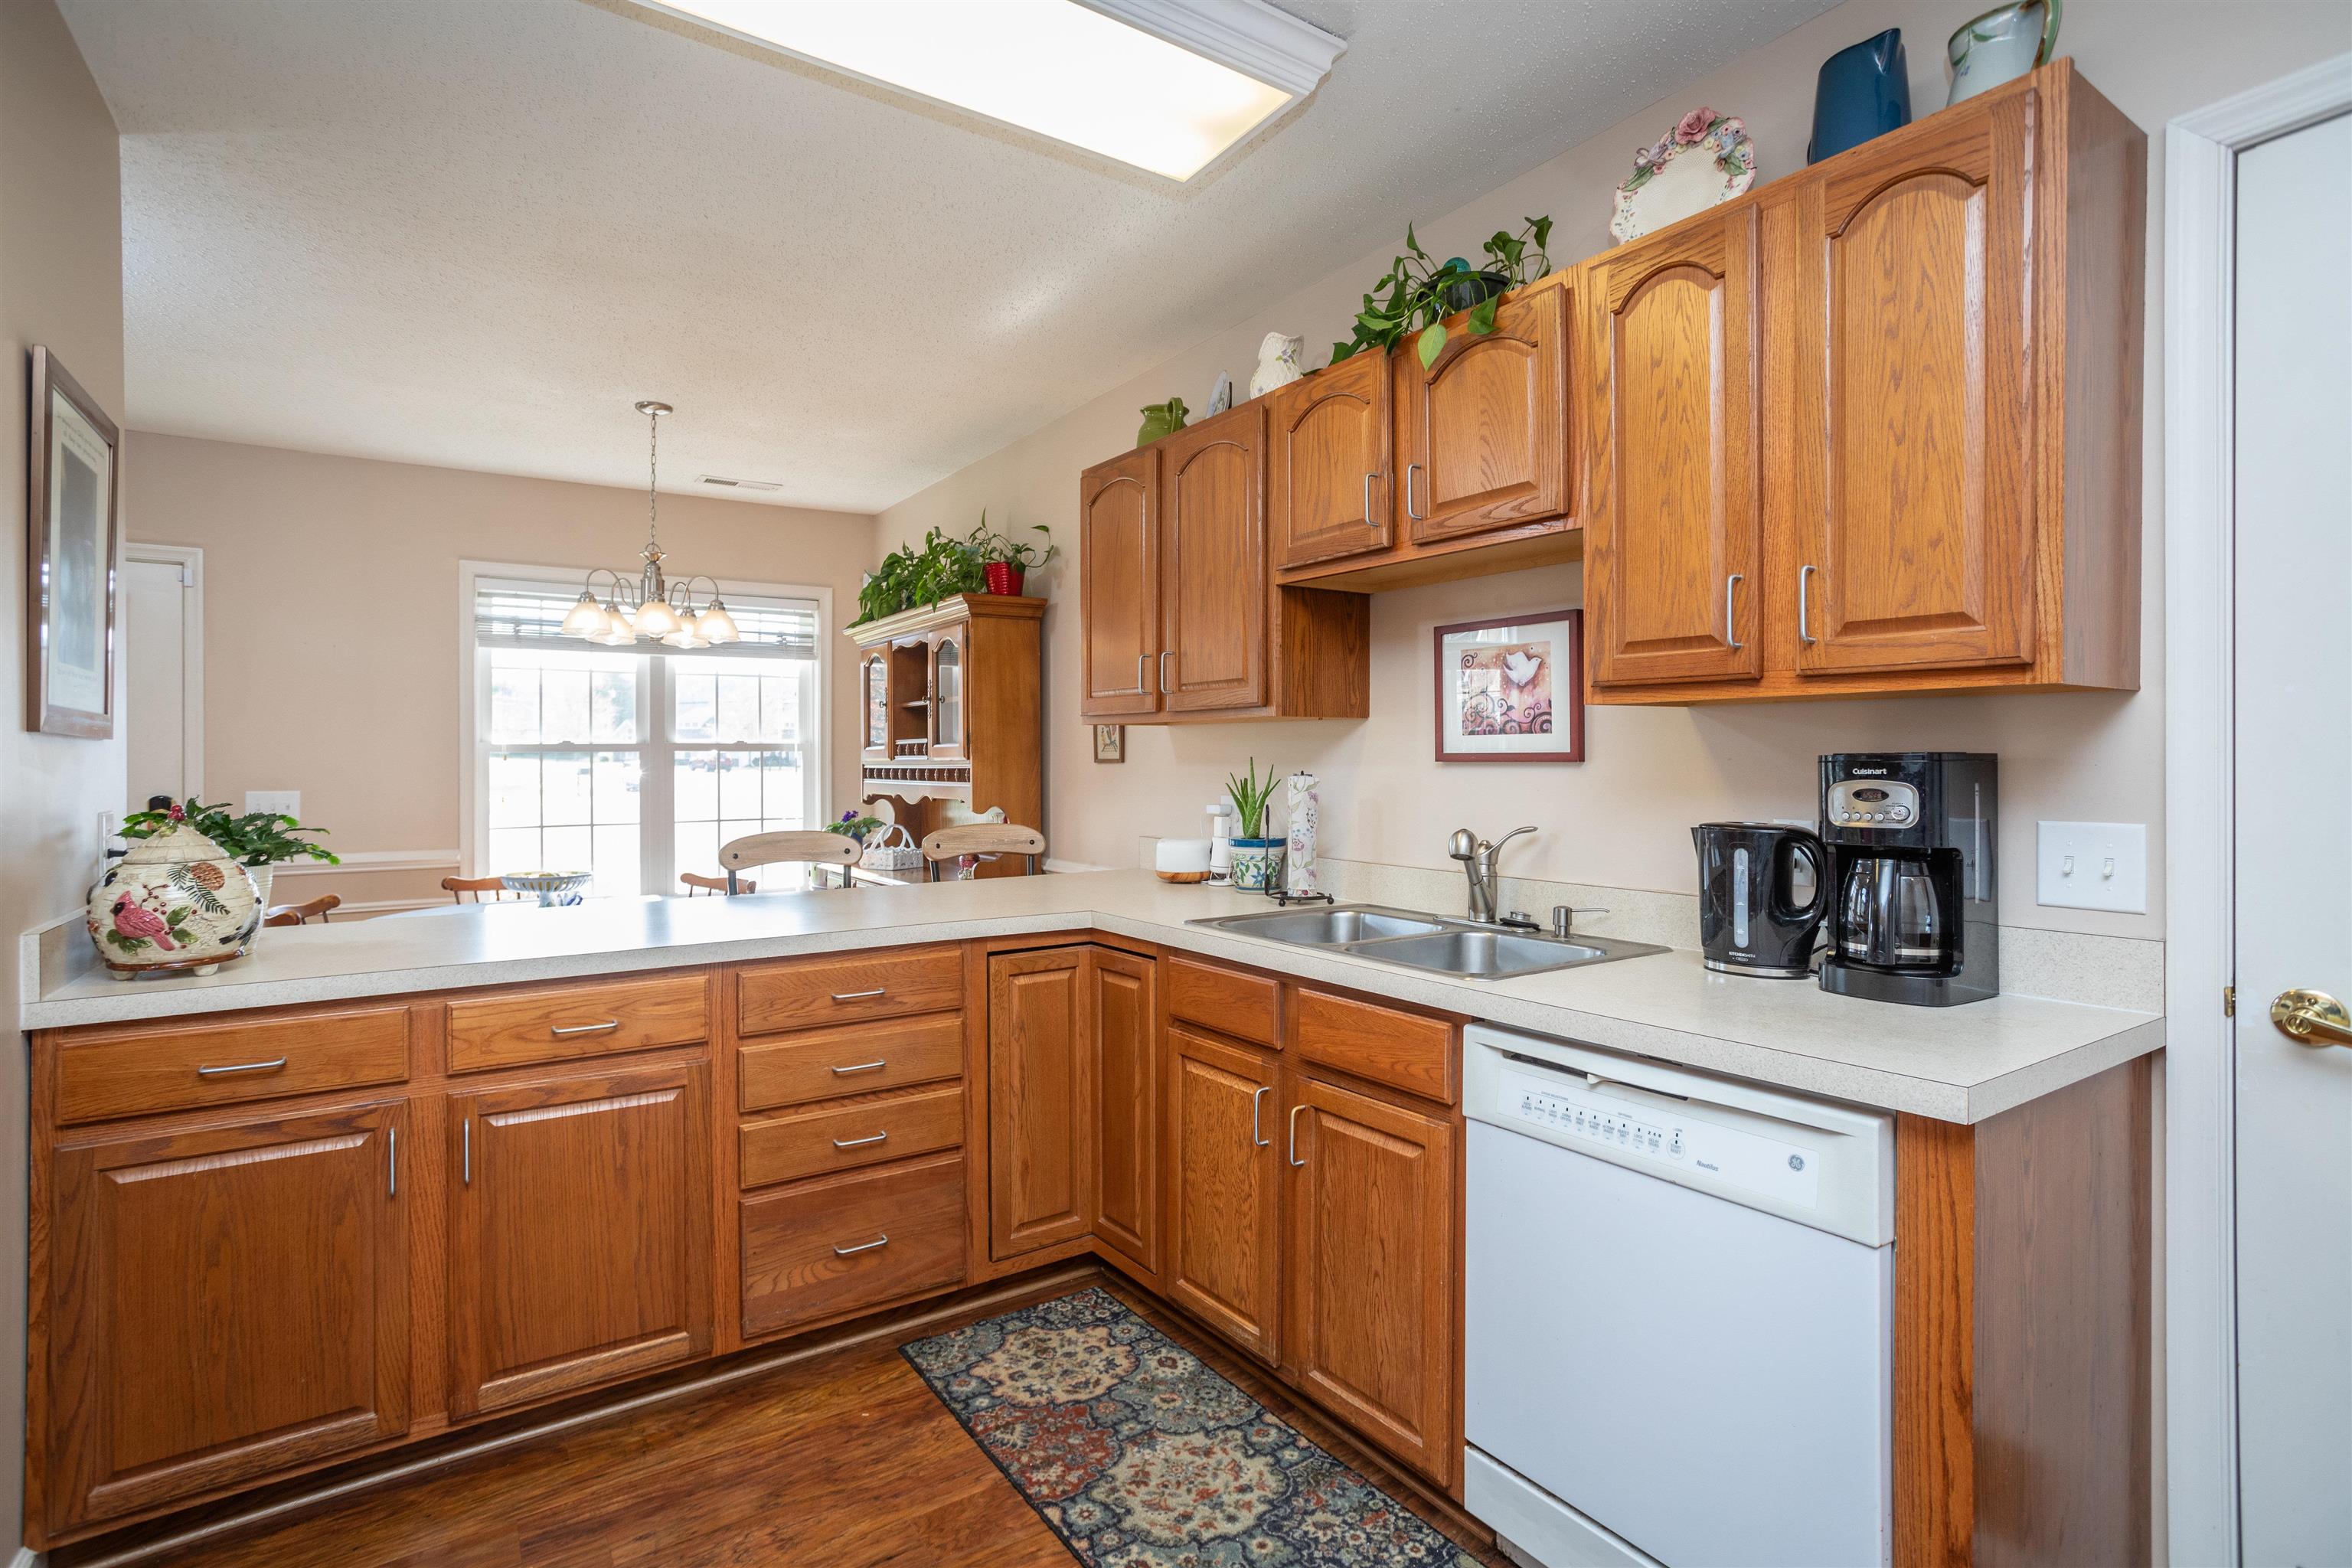 This well designed kitchen features lots of counter and cabinet space plus a good size pantry